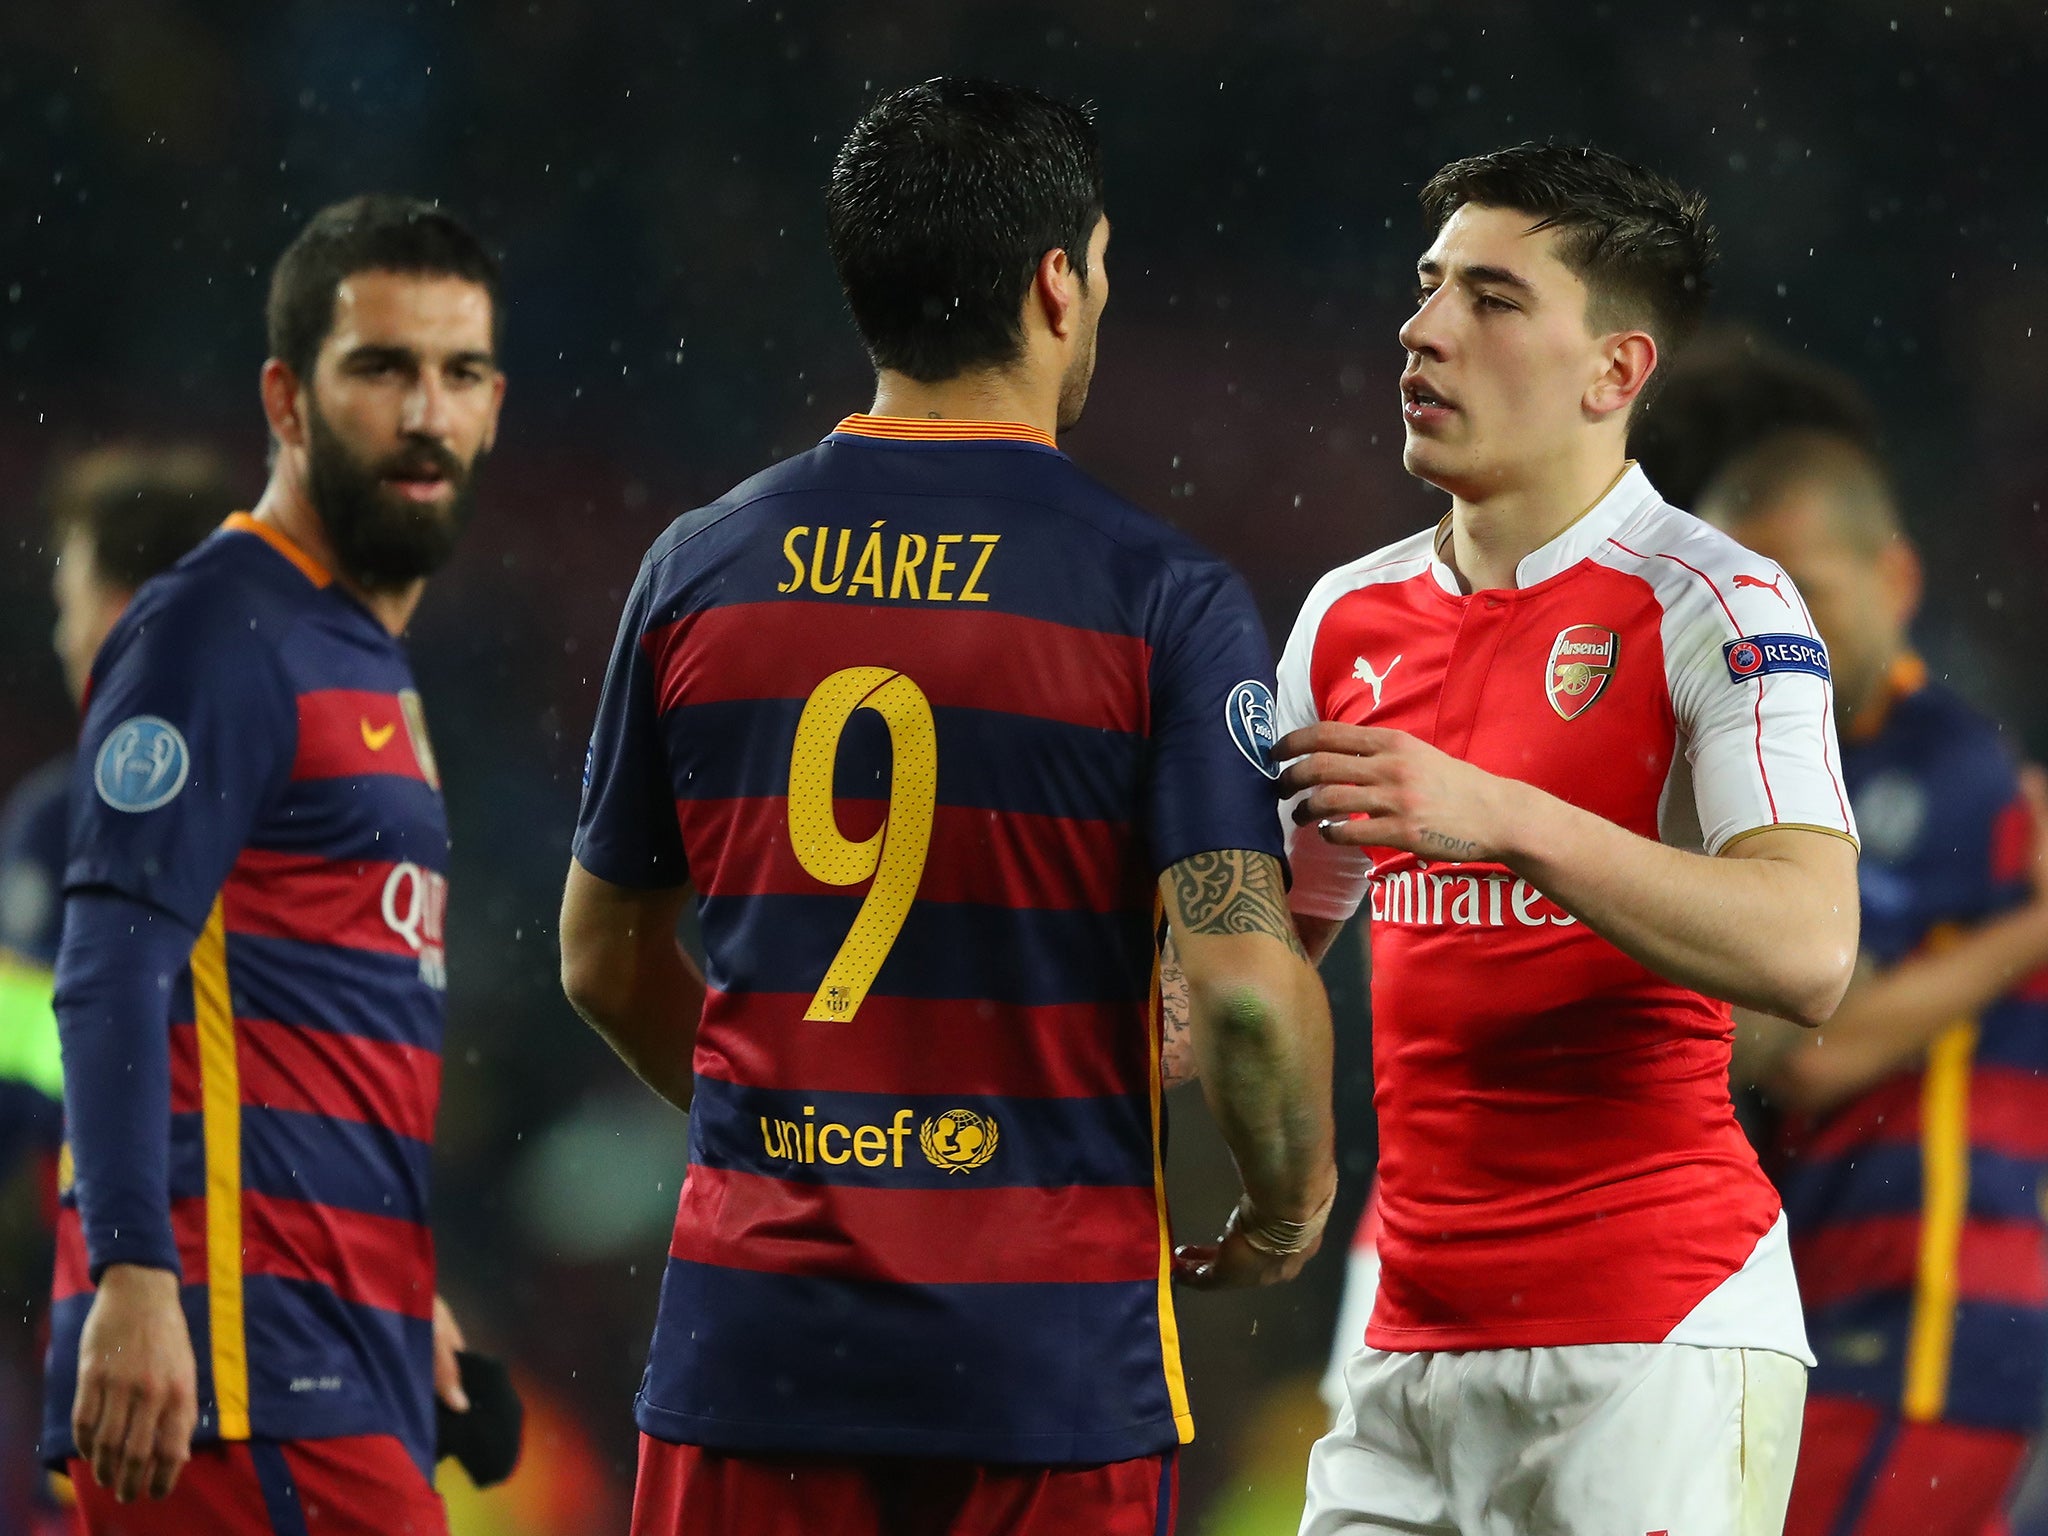 Luis Suarez greets Hector Bellerin at the final whistle